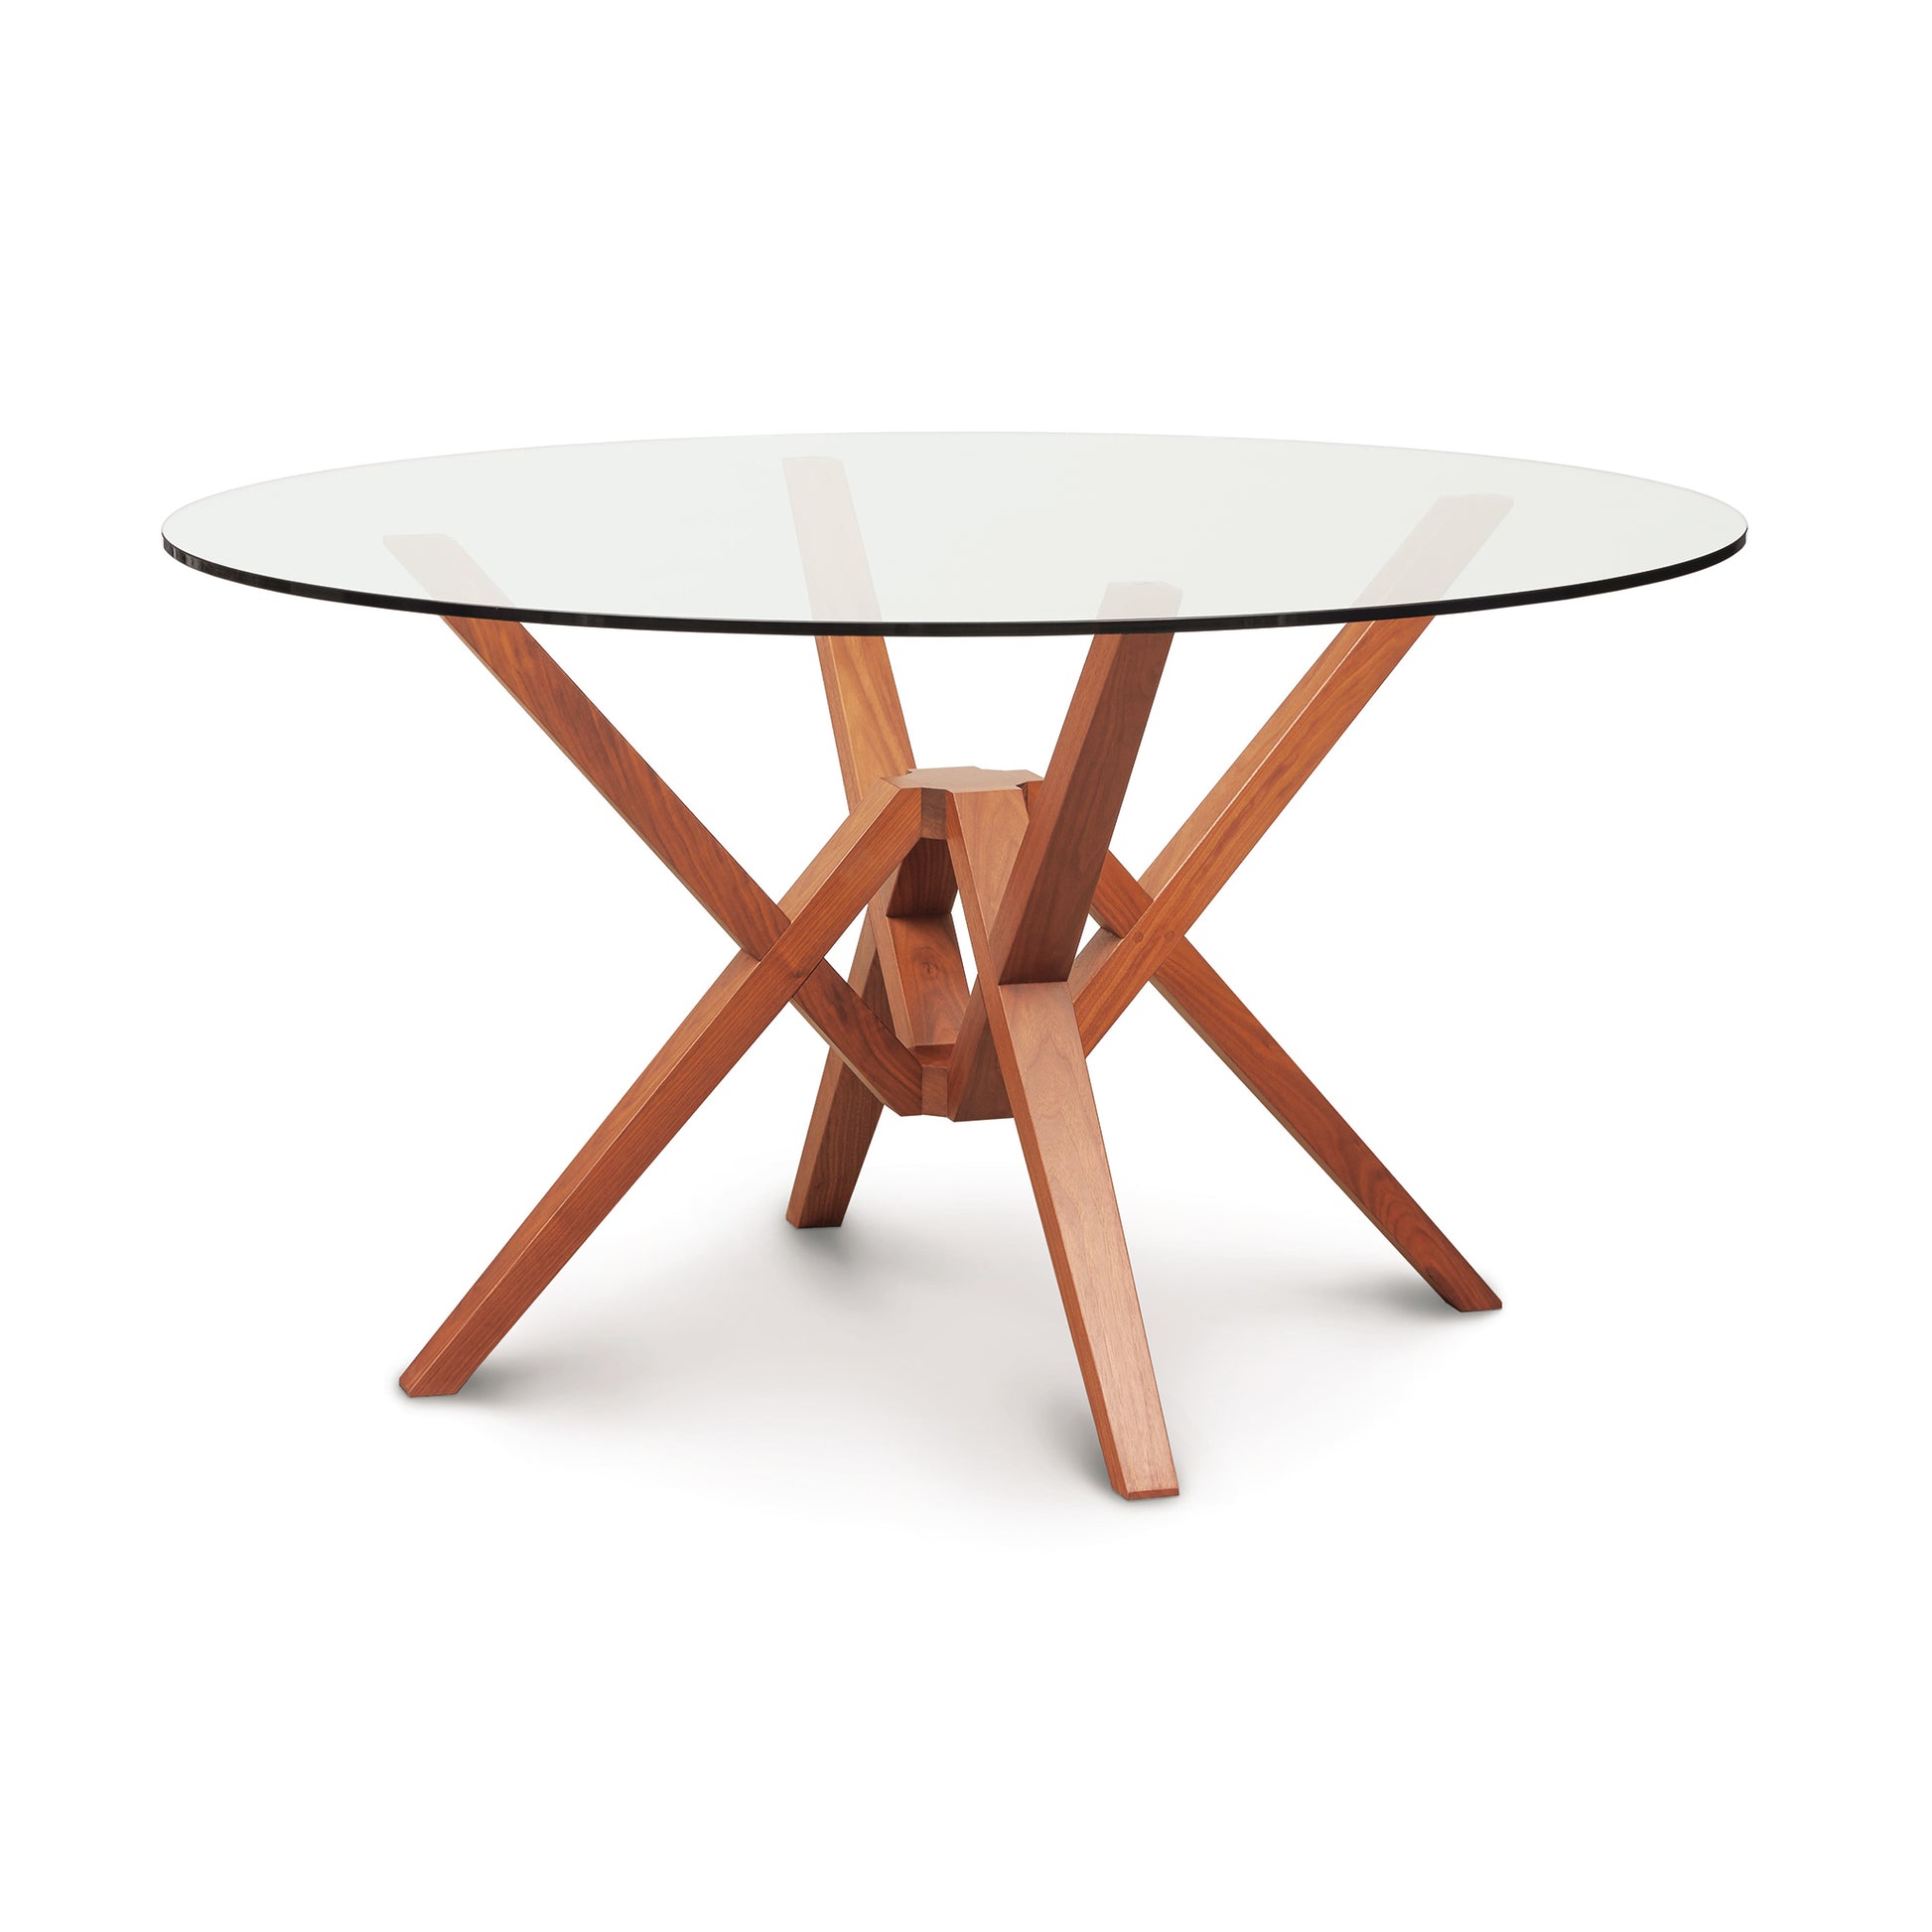 A modern Copeland Furniture Exeter Round Glass Top Table with a solid wood cross-base design on a white background.